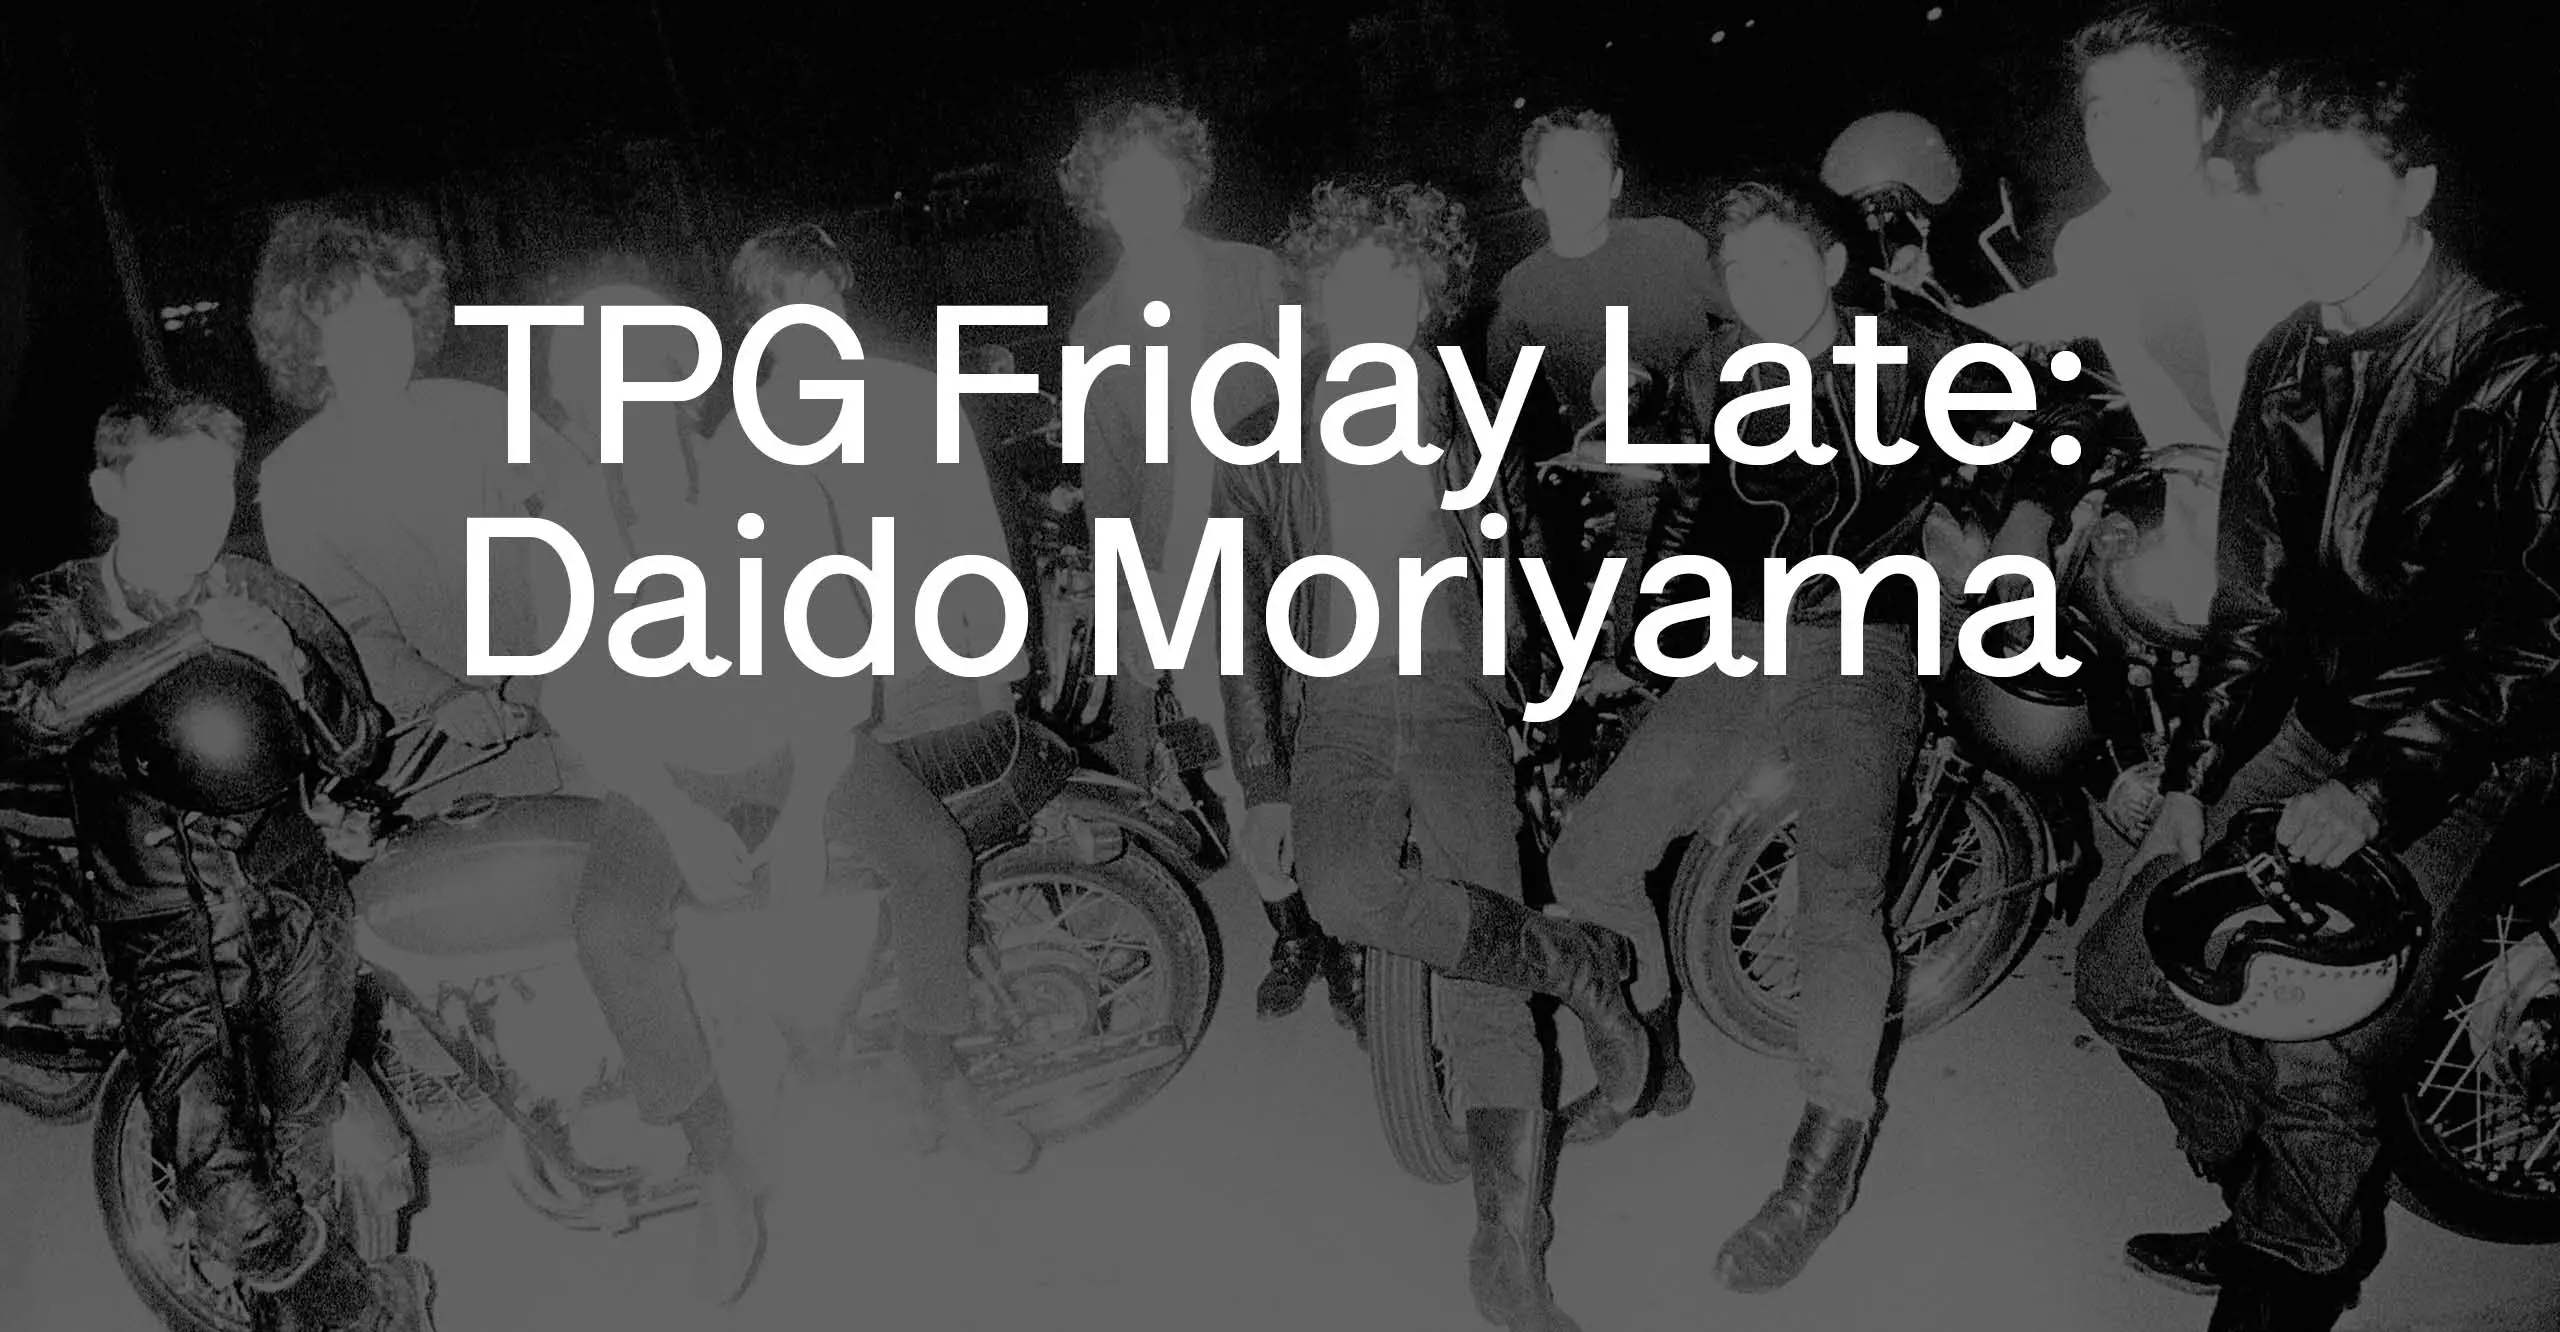 black and white image of a group of bikers with text overlayed saying "TPG Friday Late: Daido Moriyama"